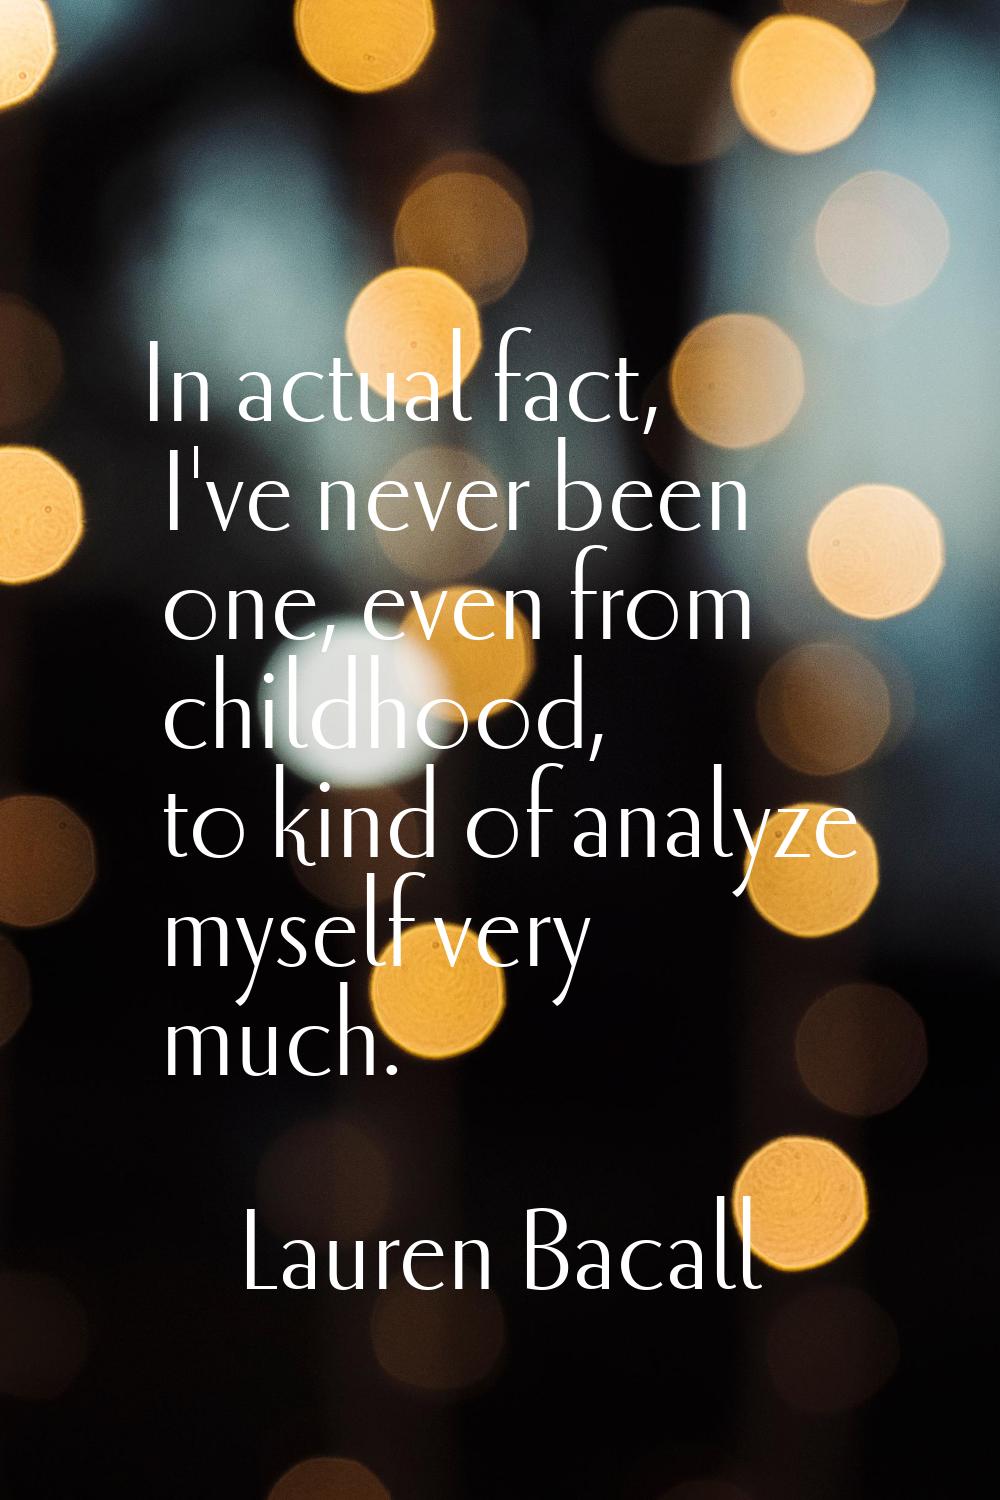 In actual fact, I've never been one, even from childhood, to kind of analyze myself very much.